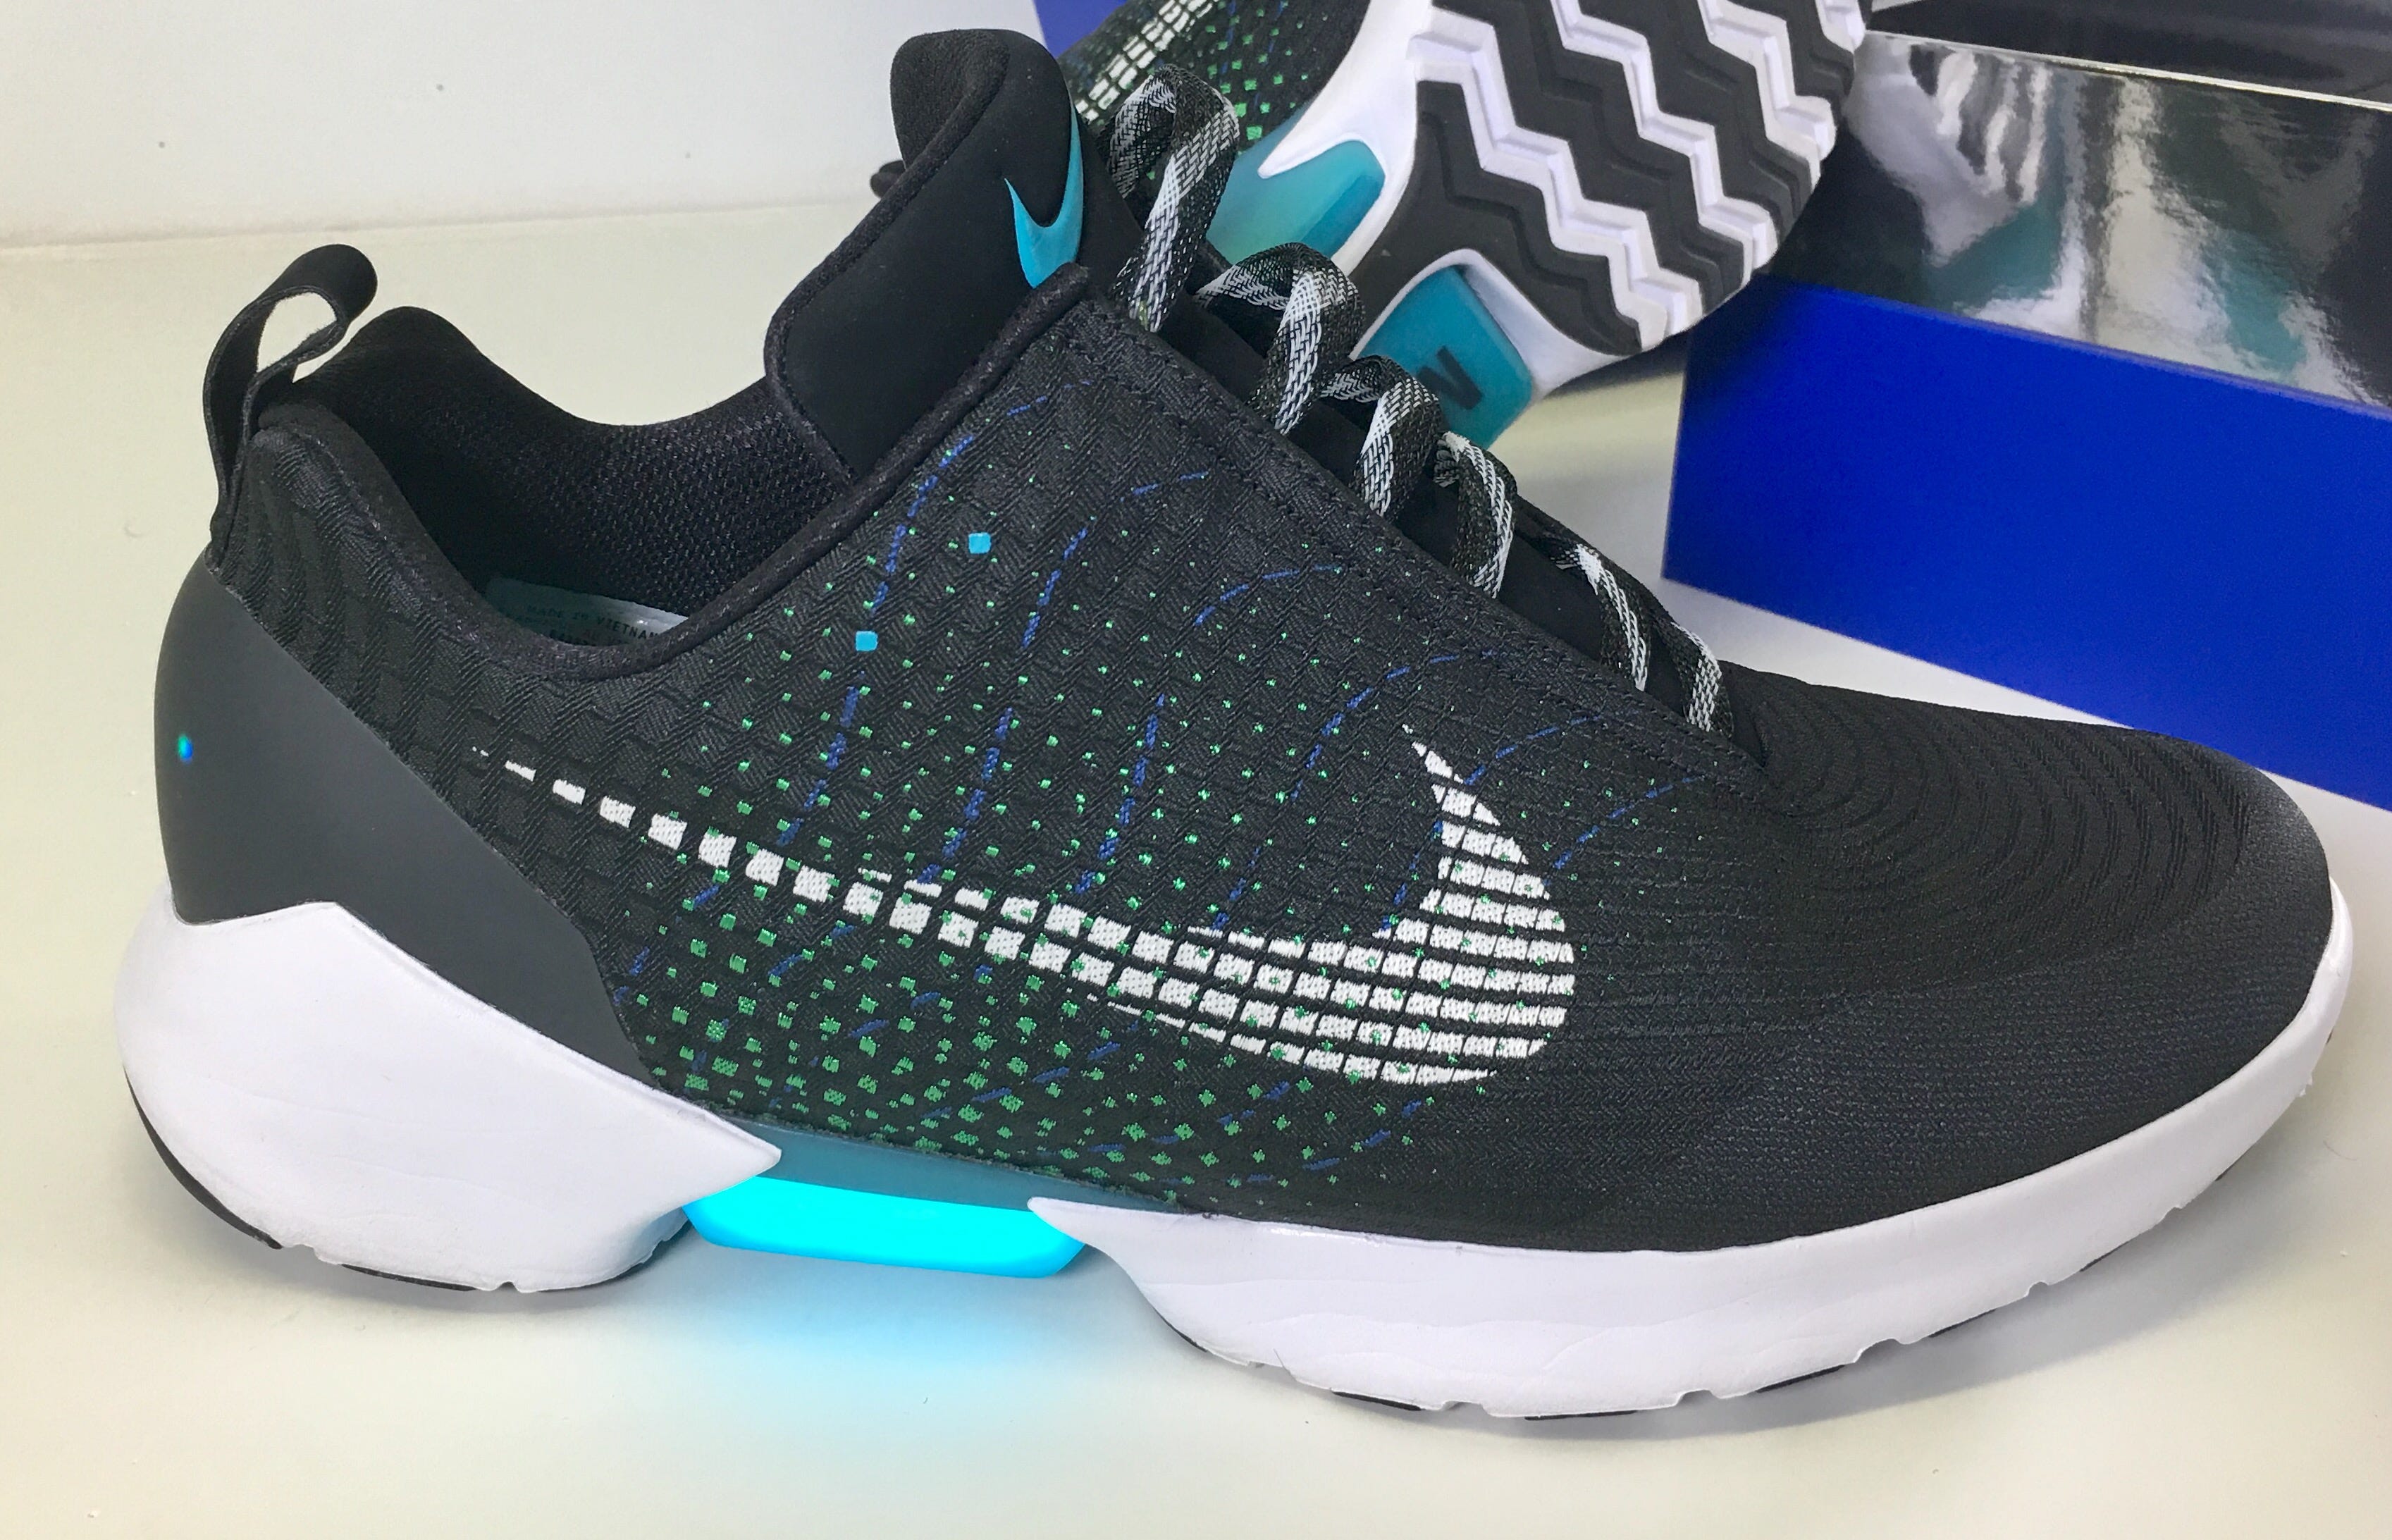 Review: Nike's self-lacing shoes are 